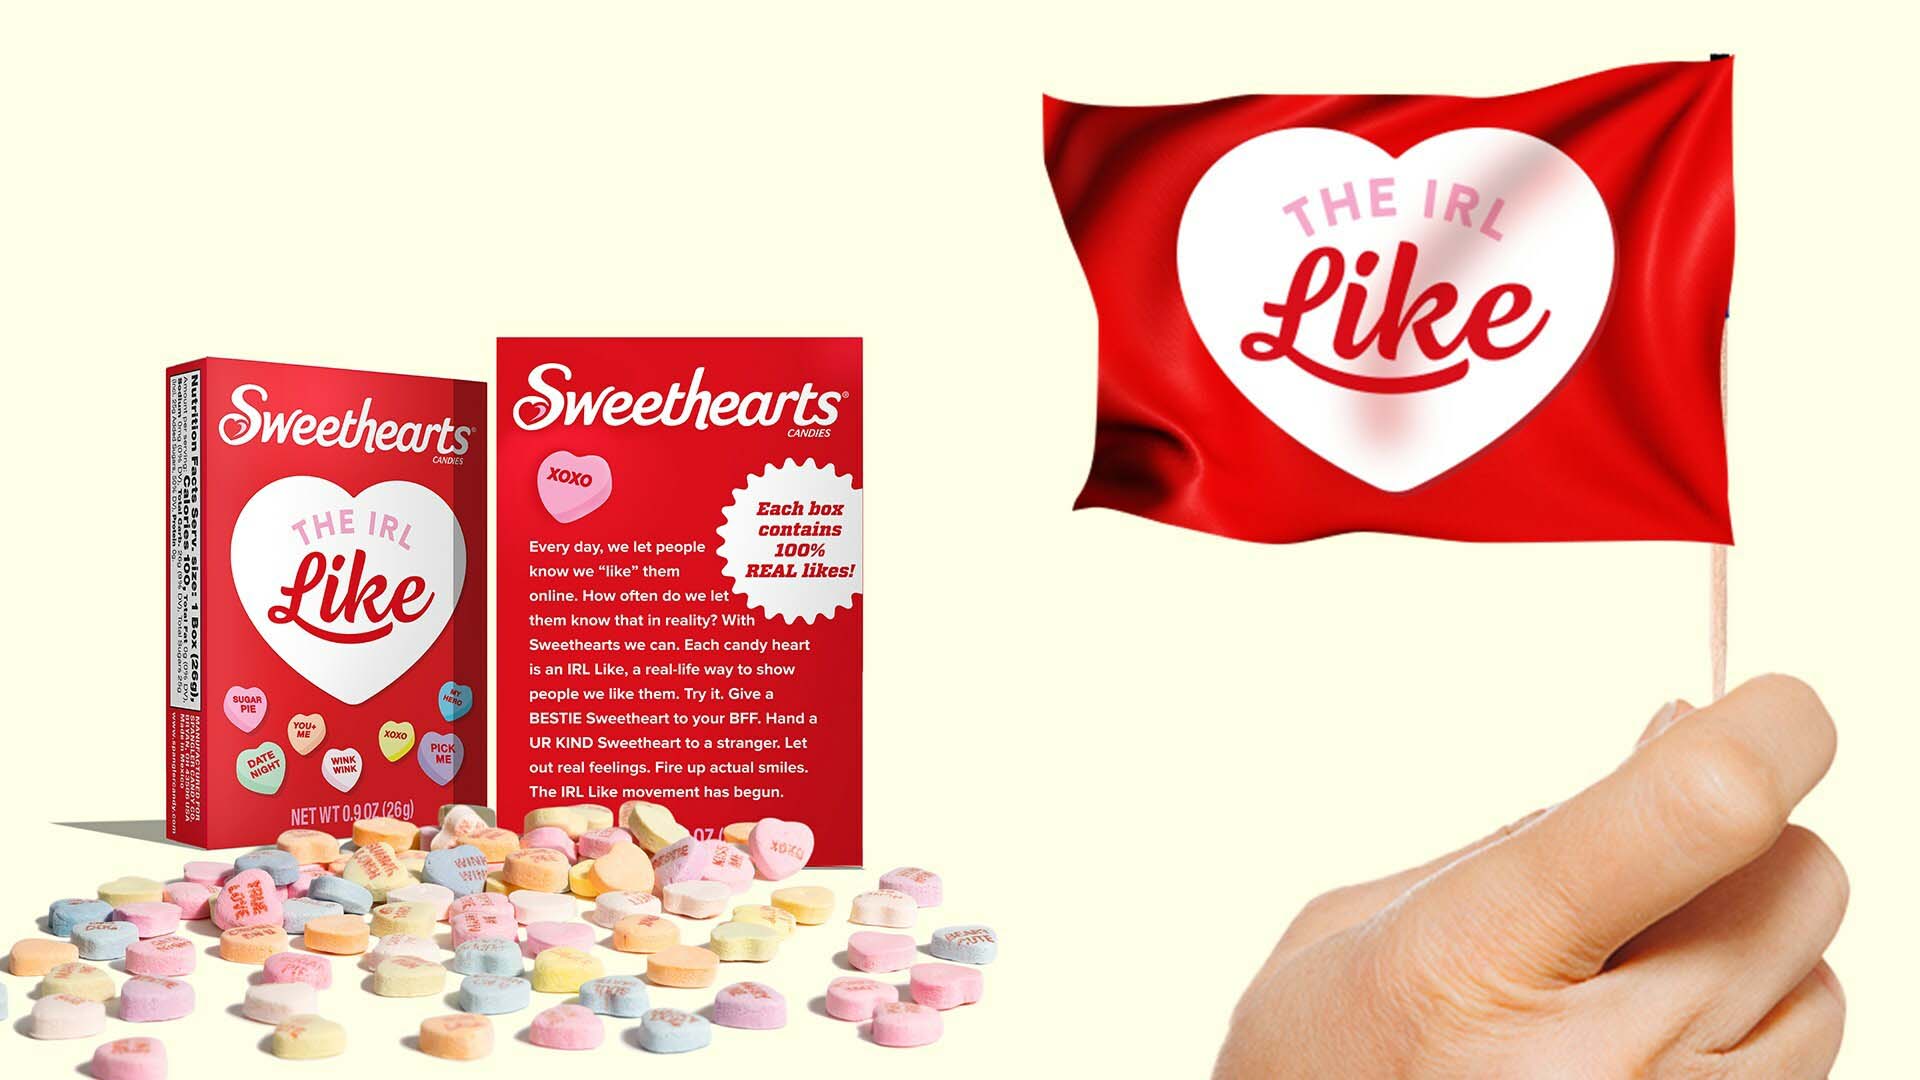 Sweethearts’ campaign to share likes in real life